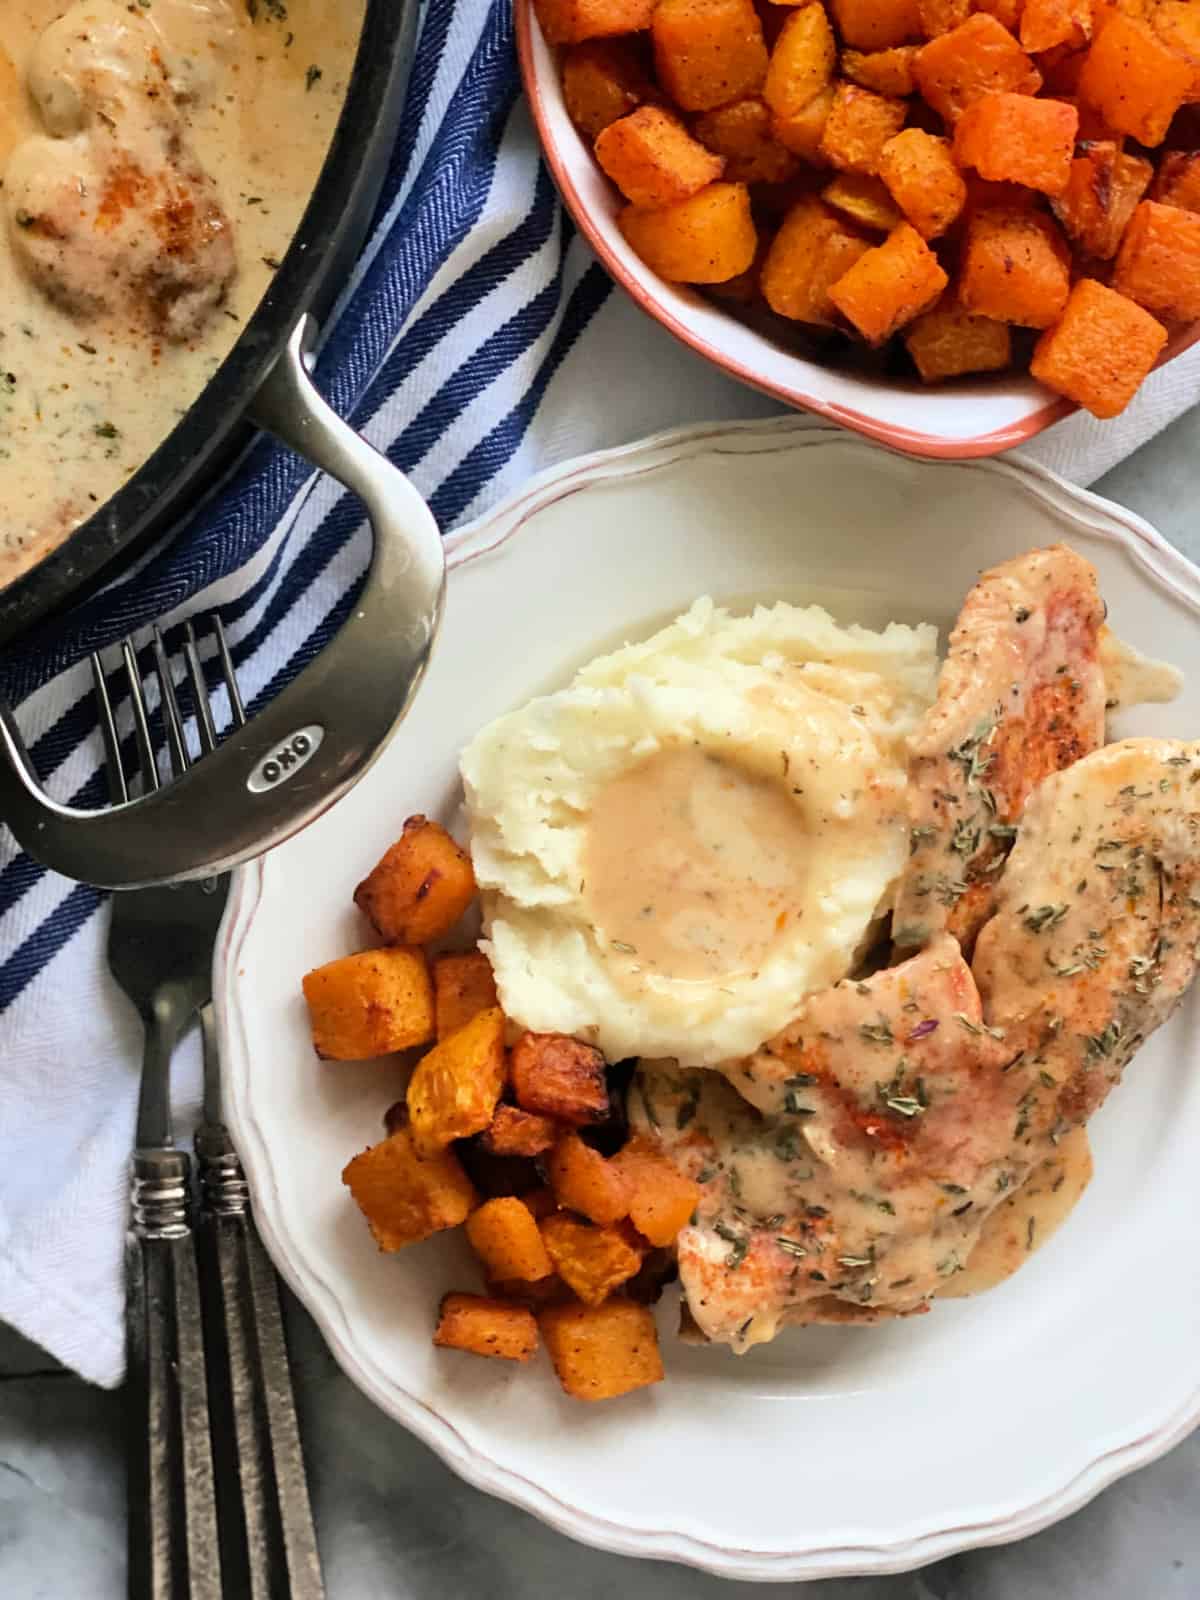 Plate with mashed potatoes, turkey cutlets, and butternut squash and air fryer butternut squash in a dish on a blue and white striped cloth and two forks.